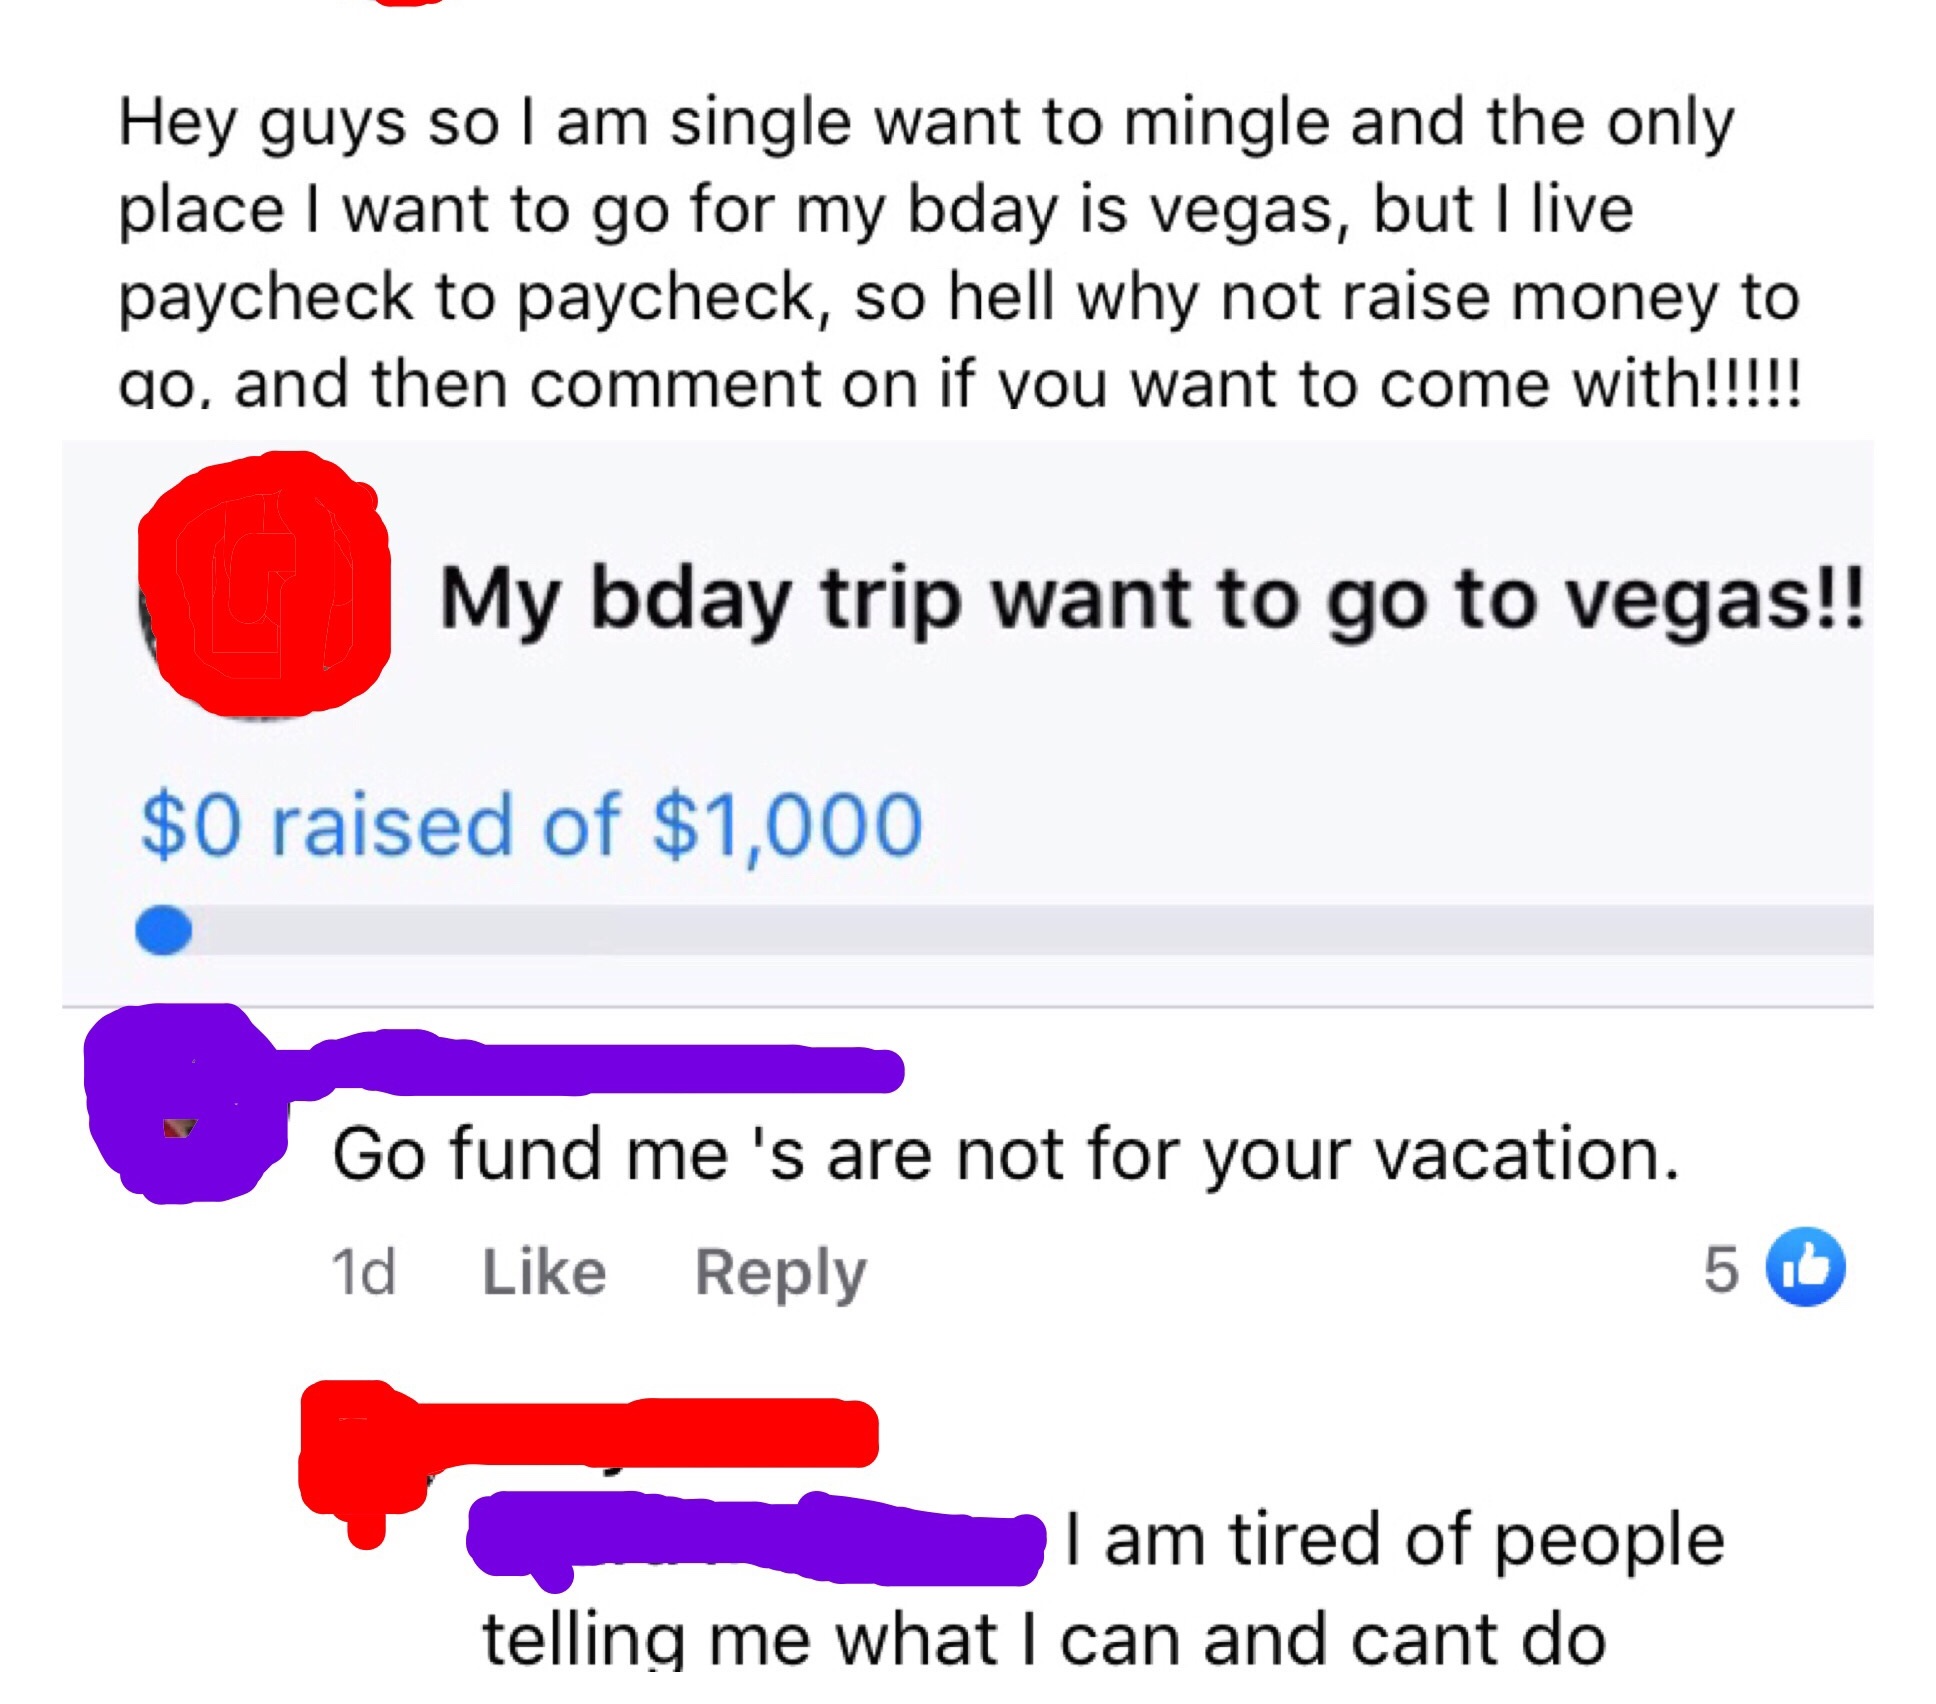 angle - Hey guys so I am single want to mingle and the only place I want to go for my bday is vegas, but I live paycheck to paycheck, so hell why not raise money to go, and then comment on if you want to come with!!!!! My bday trip want to go to vegas!! $